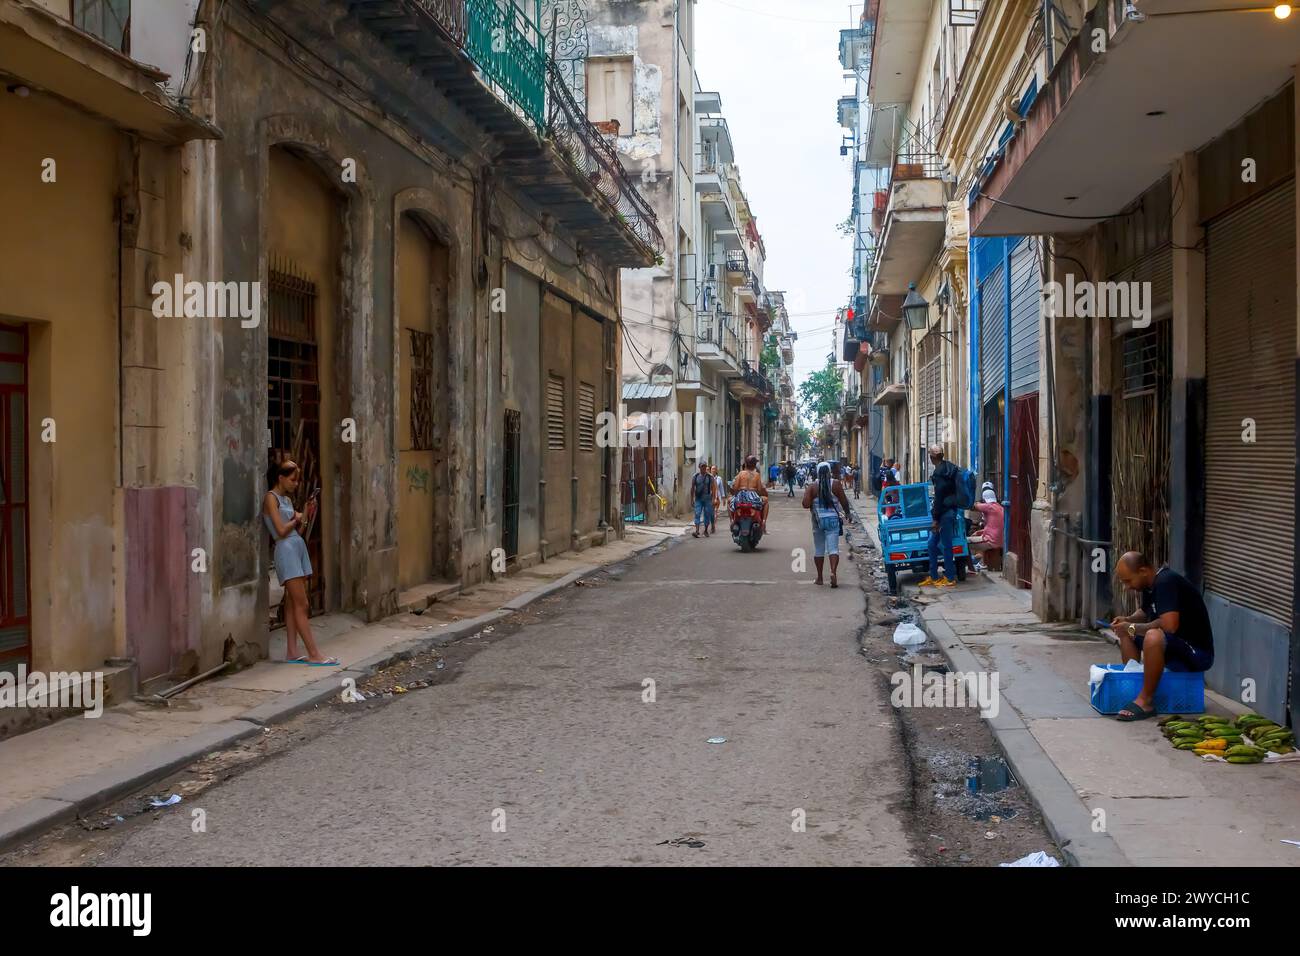 Old weathered buildings and city streets in Havana, Cuba Stock Photo